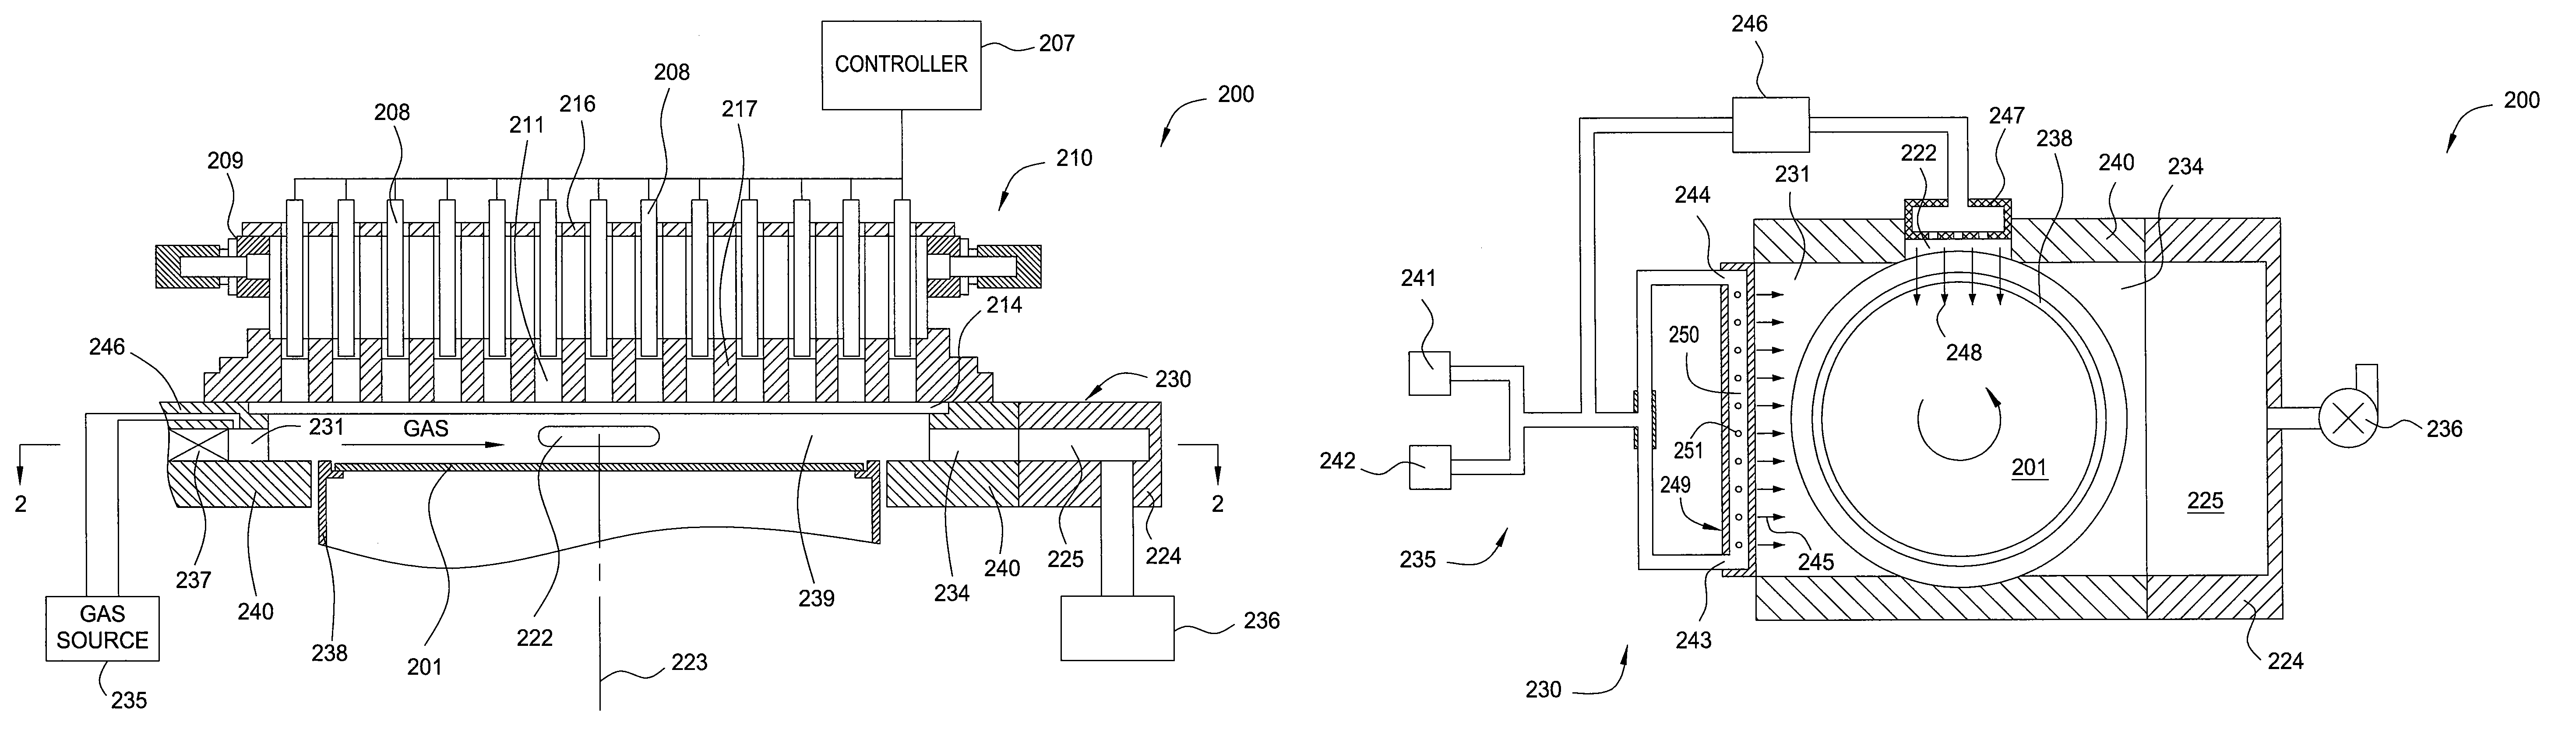 Thermal reactor with improved gas flow distribution